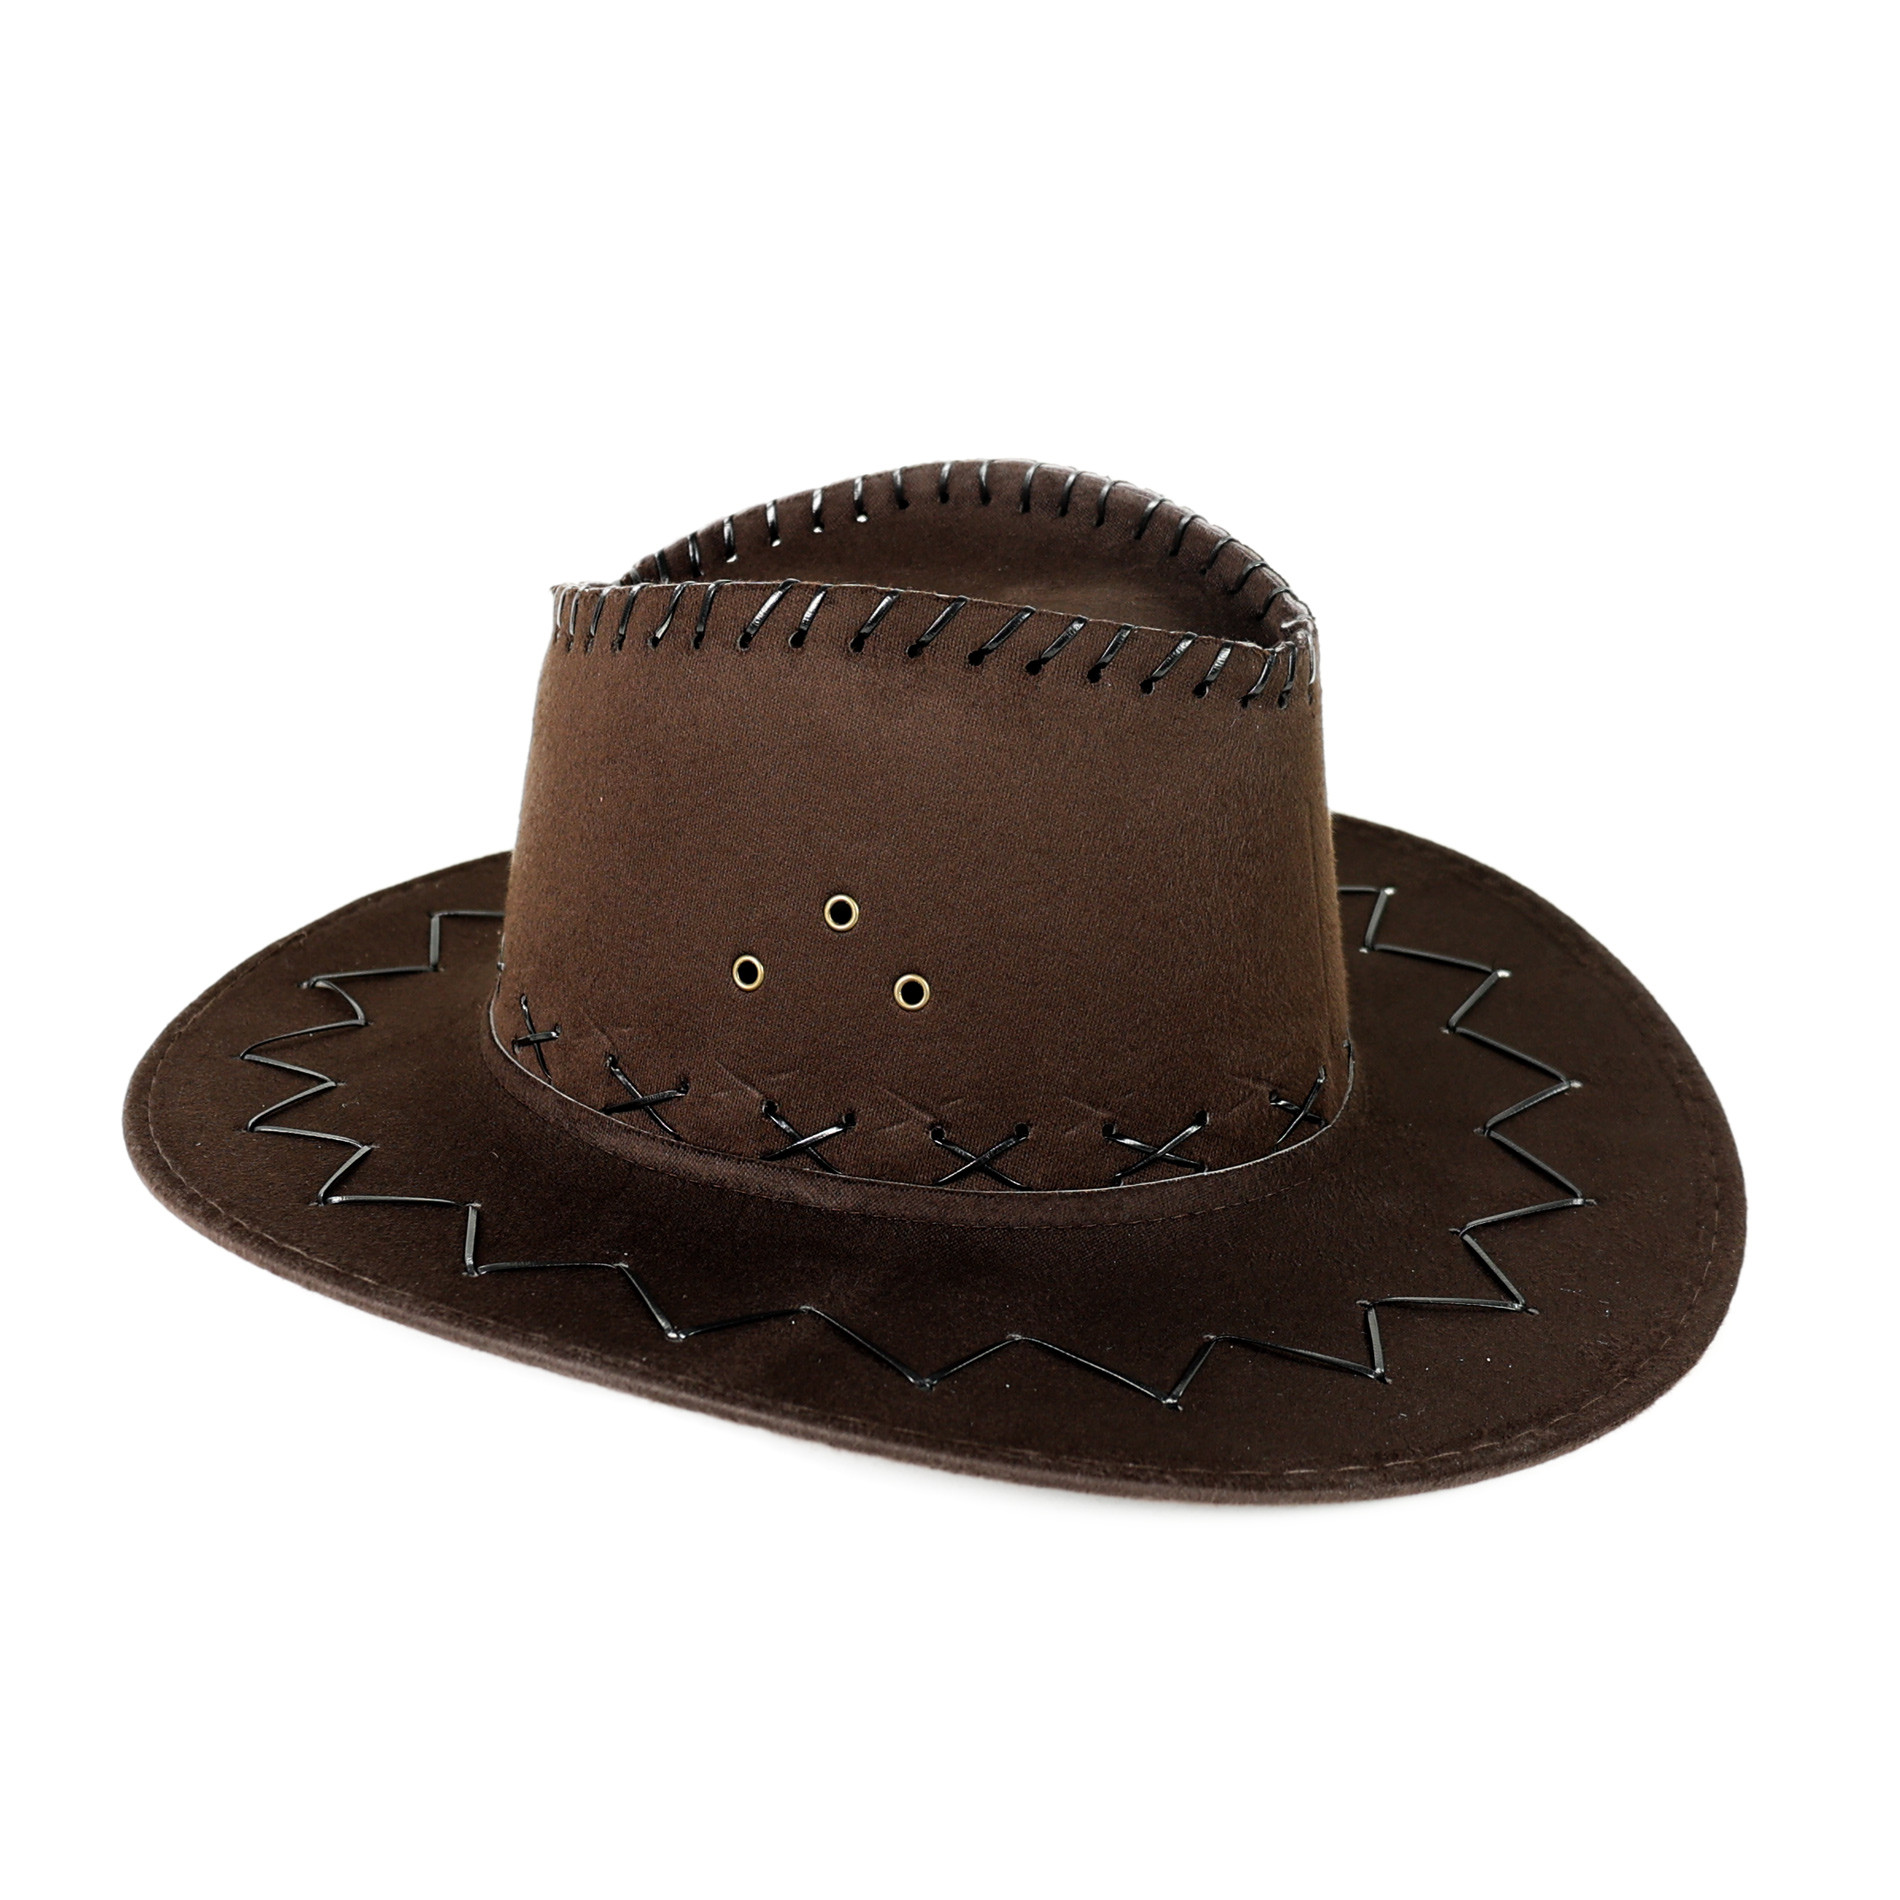 the cowboy hat for adult